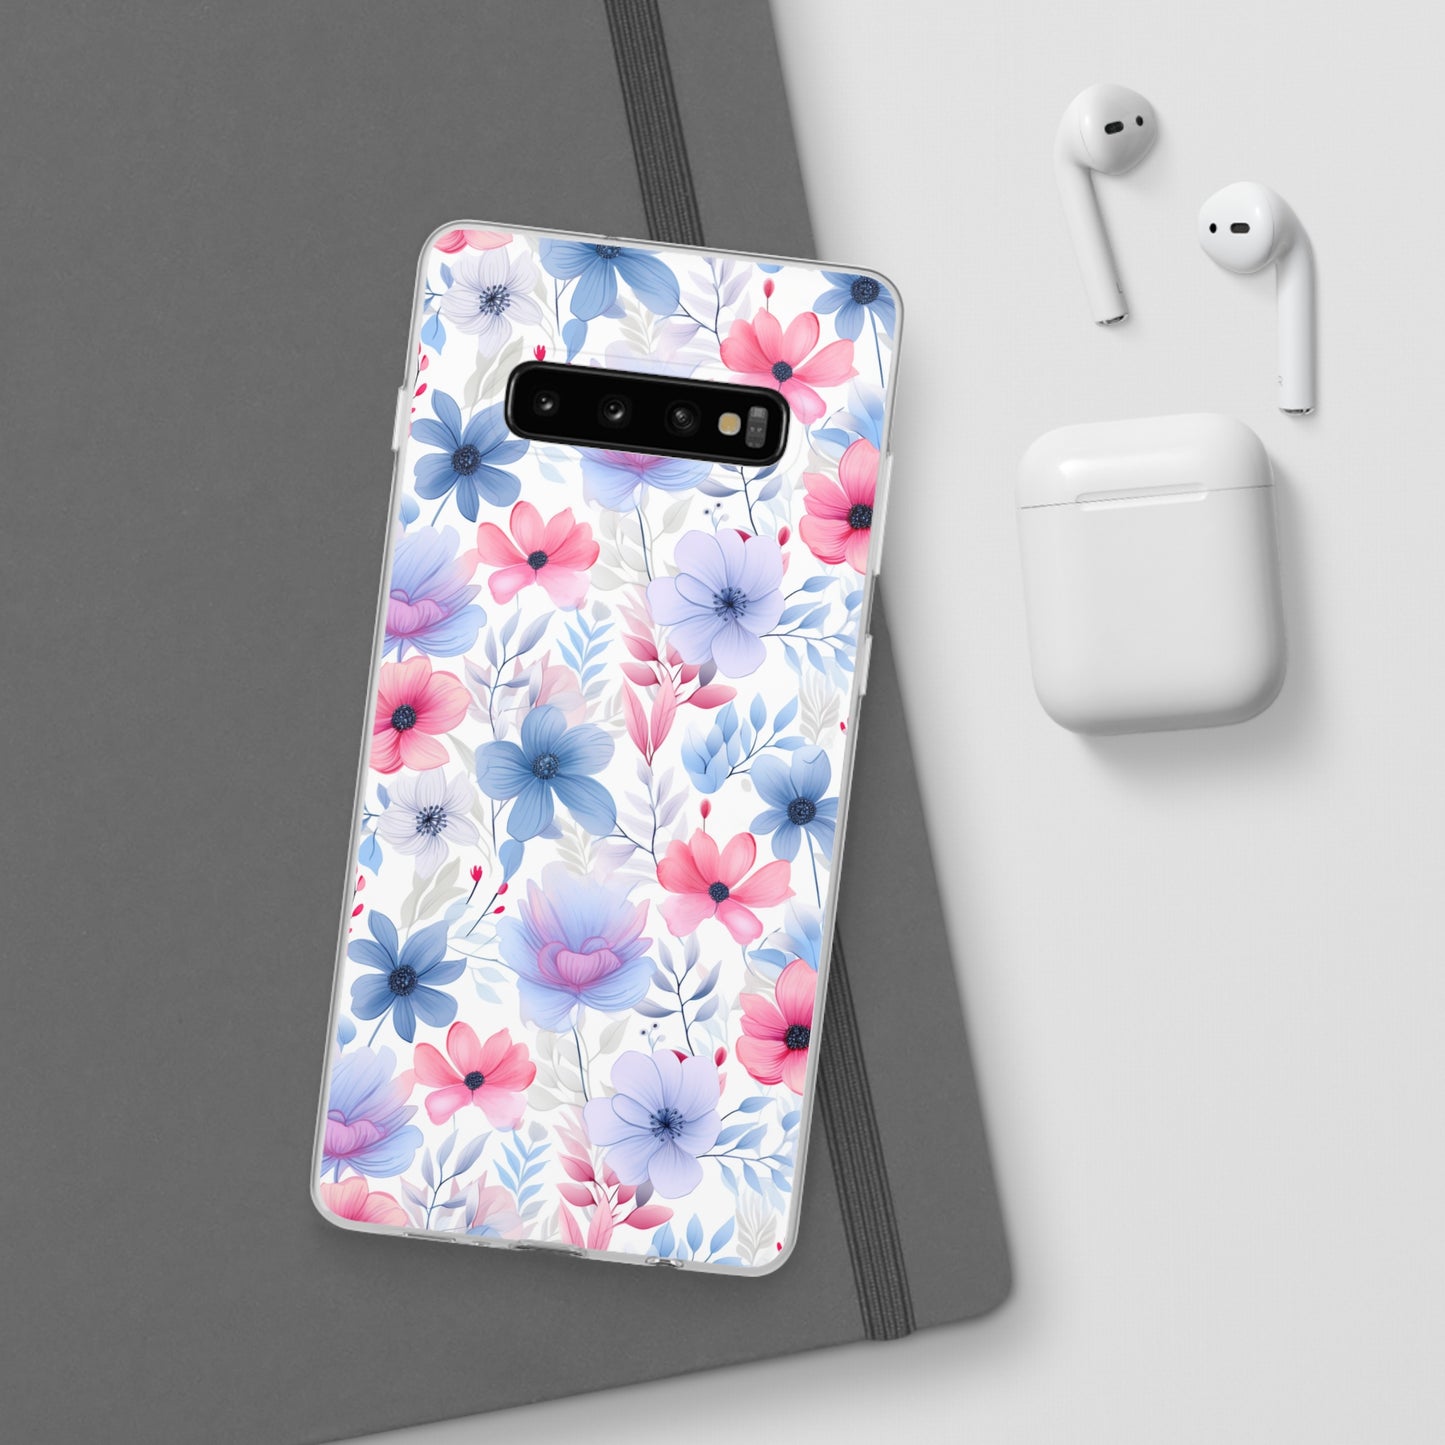 Floral Whispers - Soft Hues of Violets, Pinks, and Blues - Flexi Phone Case Phone Case Pattern Symphony Samsung Galaxy S10 Plus with gift packaging  